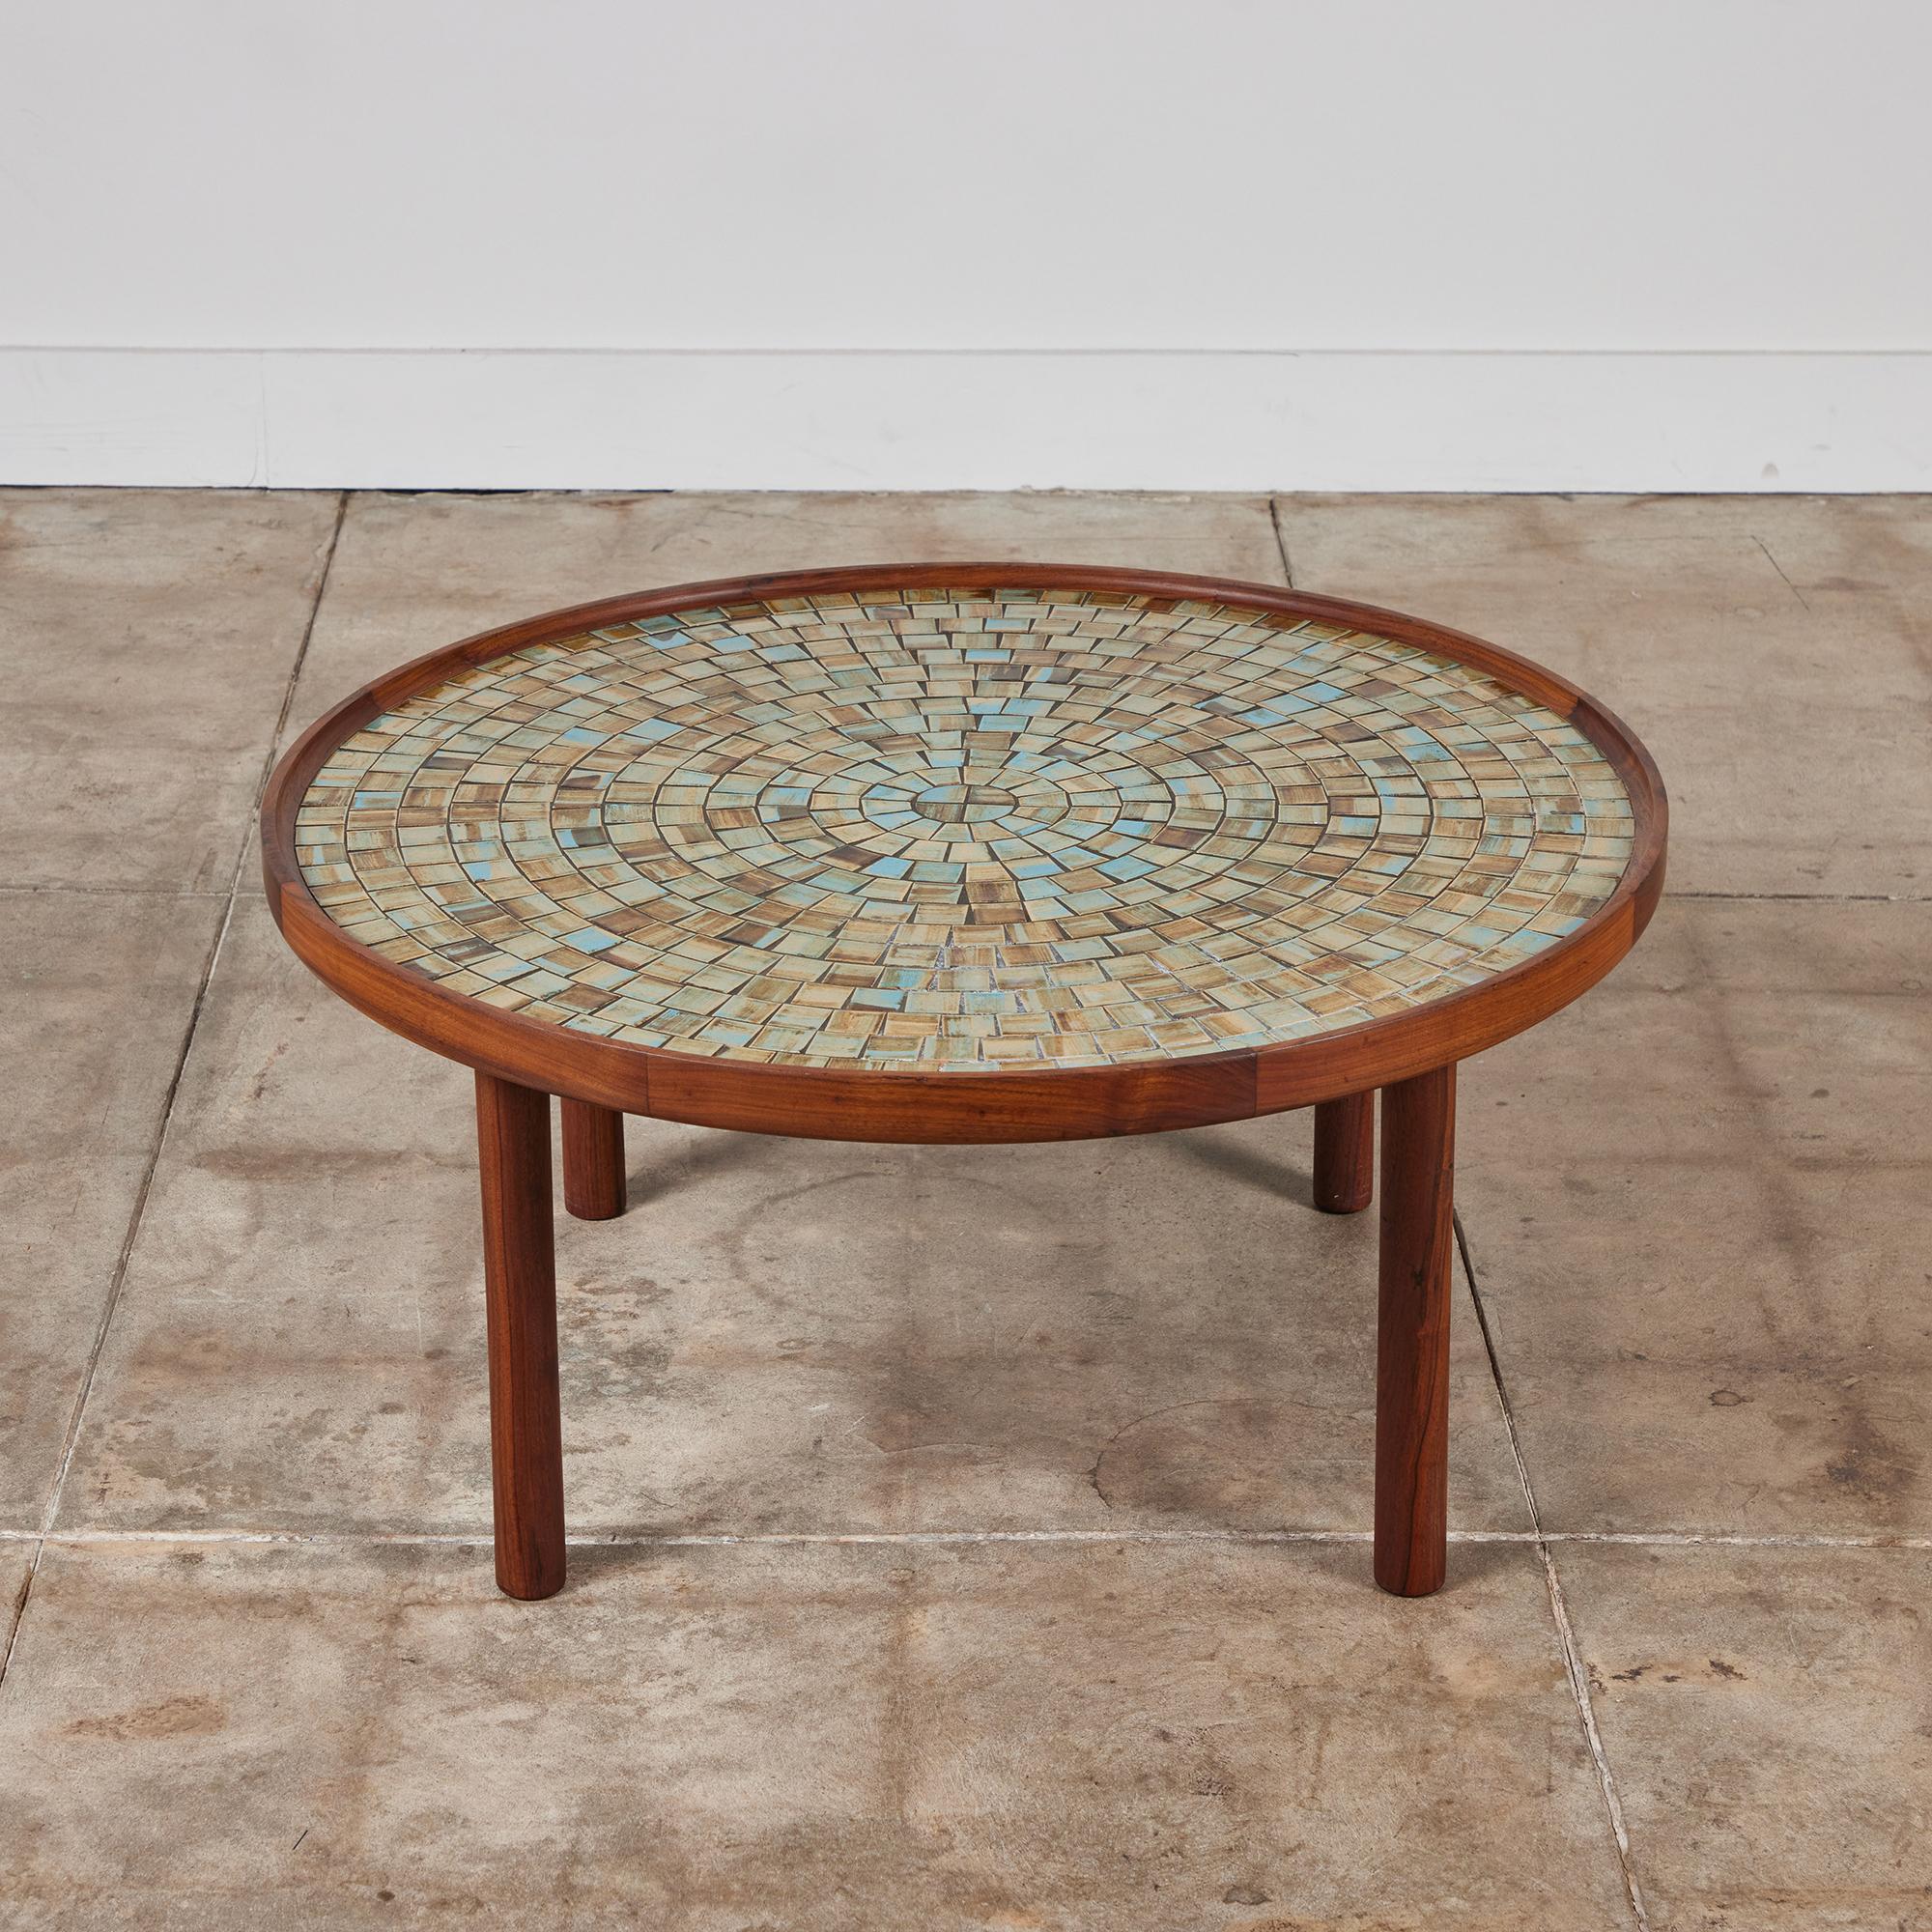 Round coffee table by Gordon & Jane Martz for Marshall Studios c.1960s, USA. The table top is inlaid with square and triangular blue, brown and beige glazed ceramic tiles in a geometric pattern. The frame and four rounded legs of the table are all